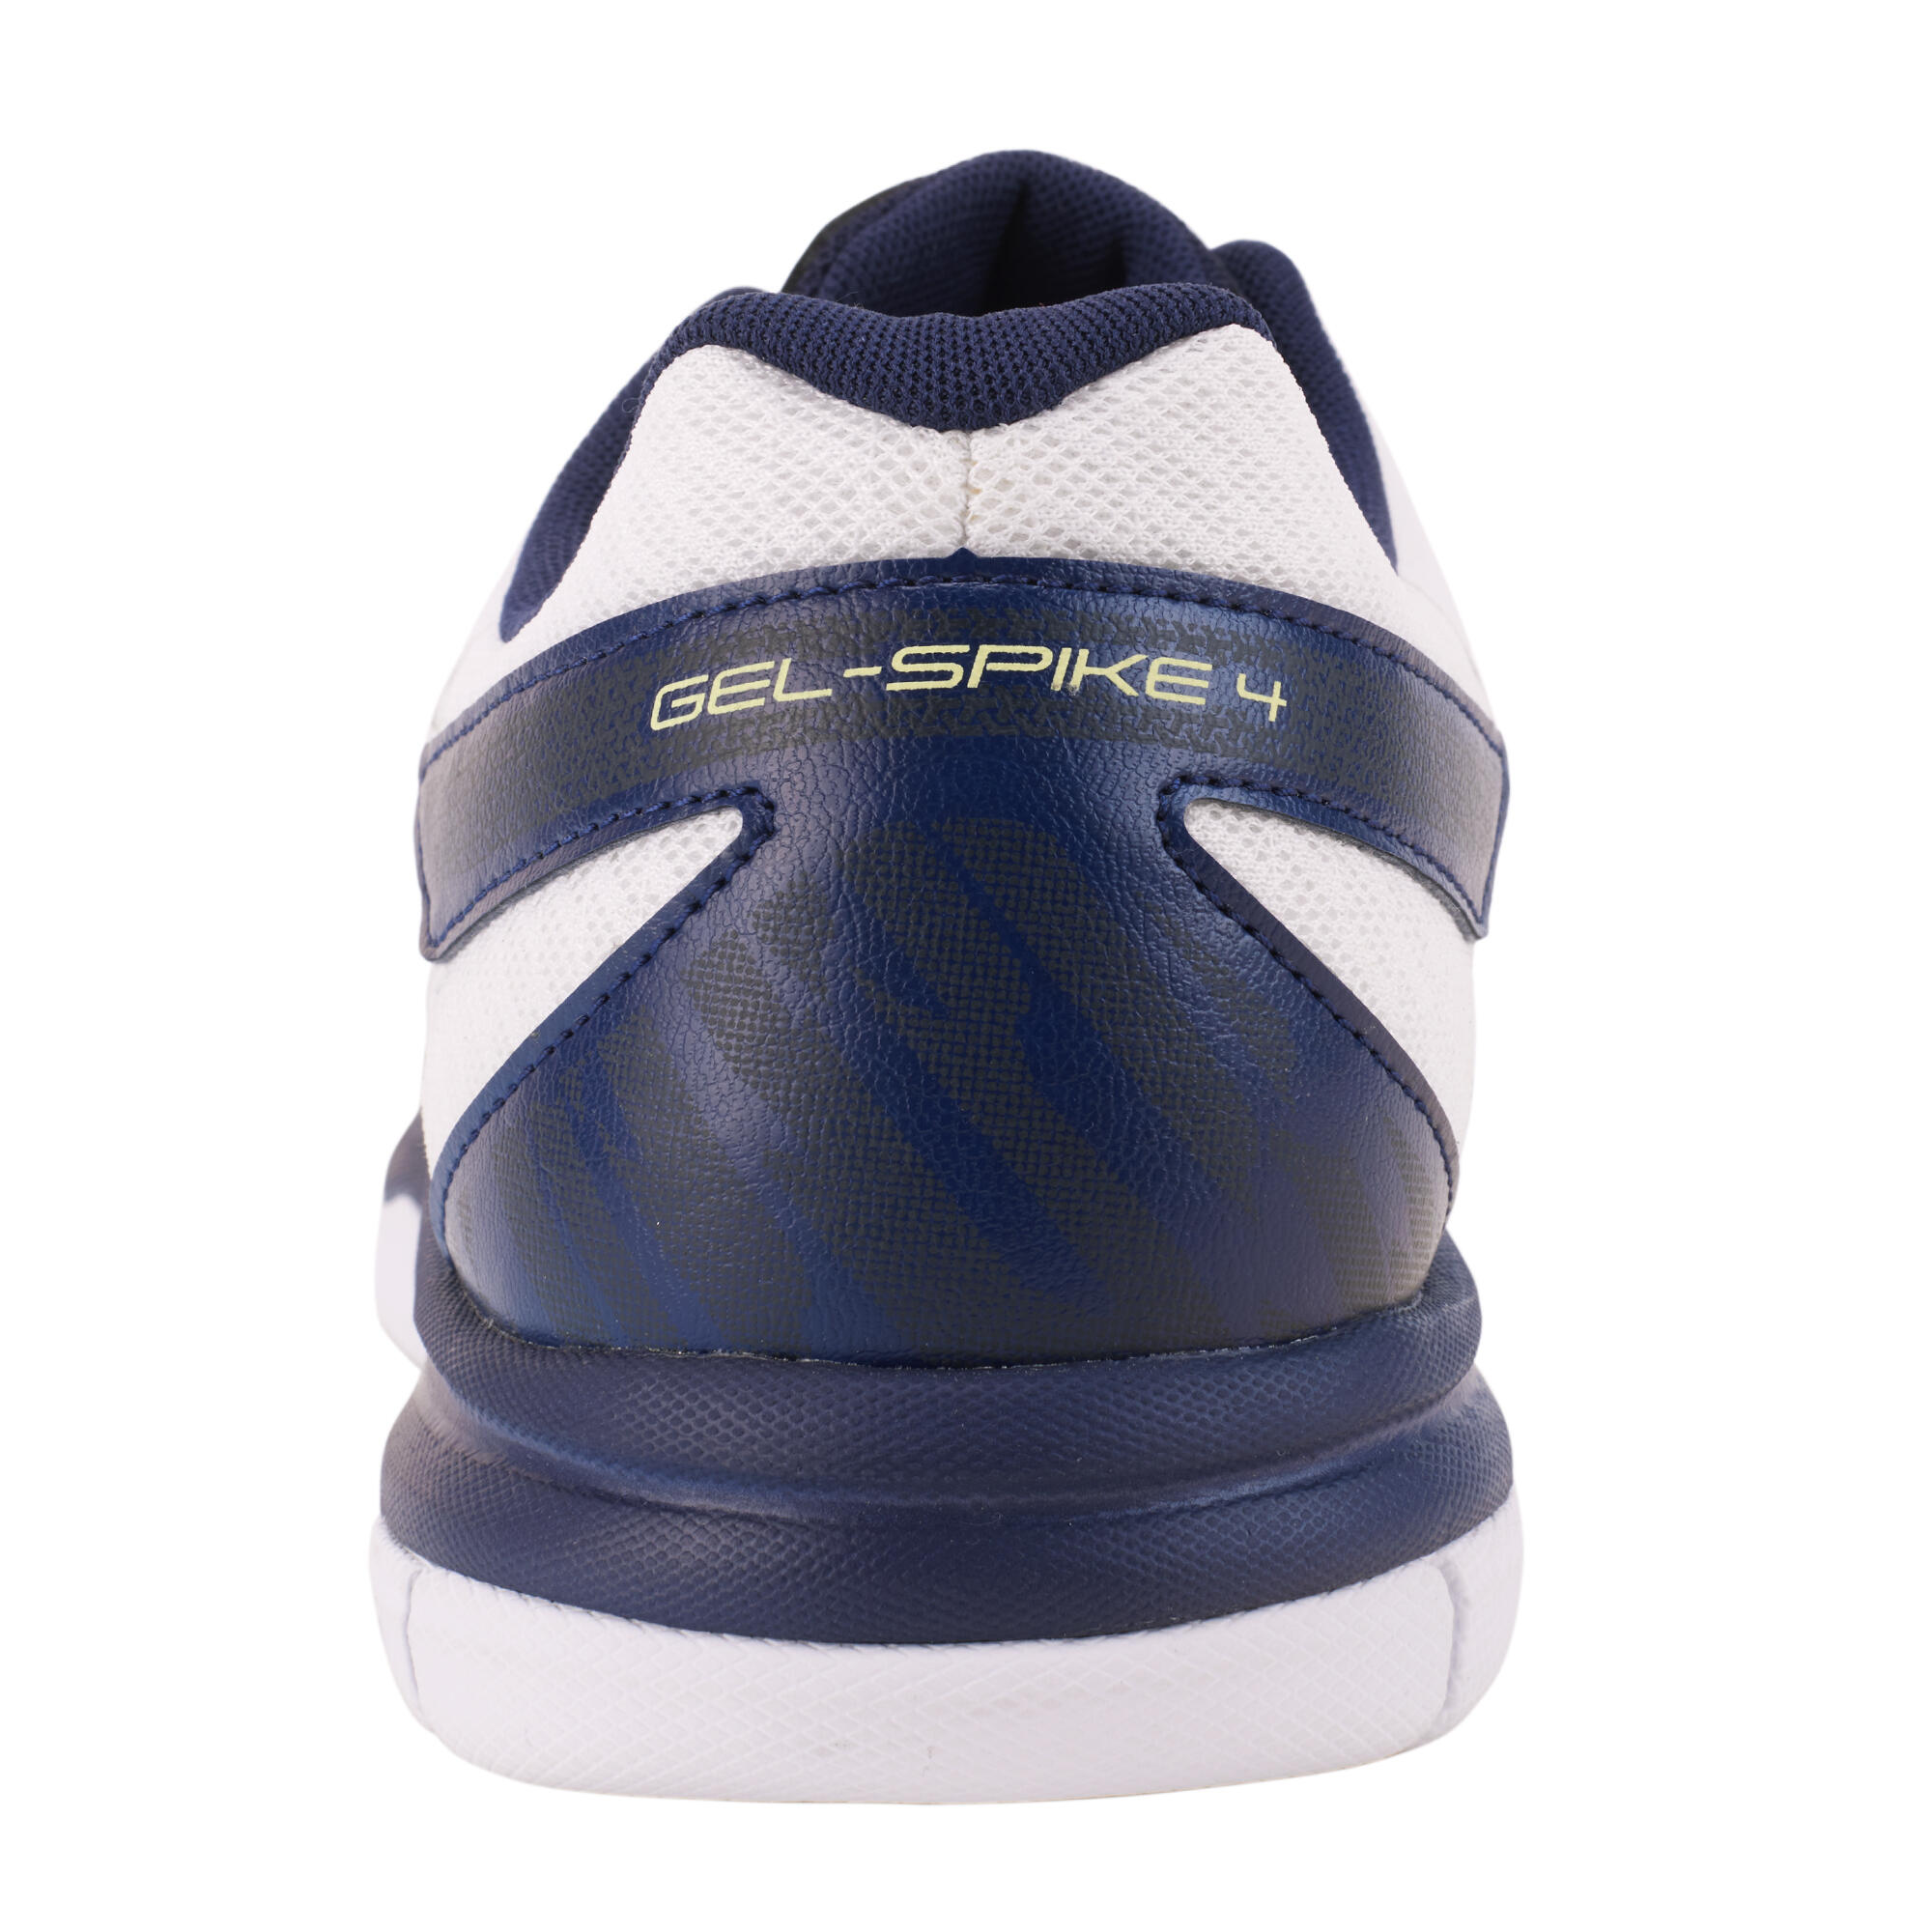 Men's Volleyball Shoes Gel Spike 4 - White/Blue/Yellow 3/6